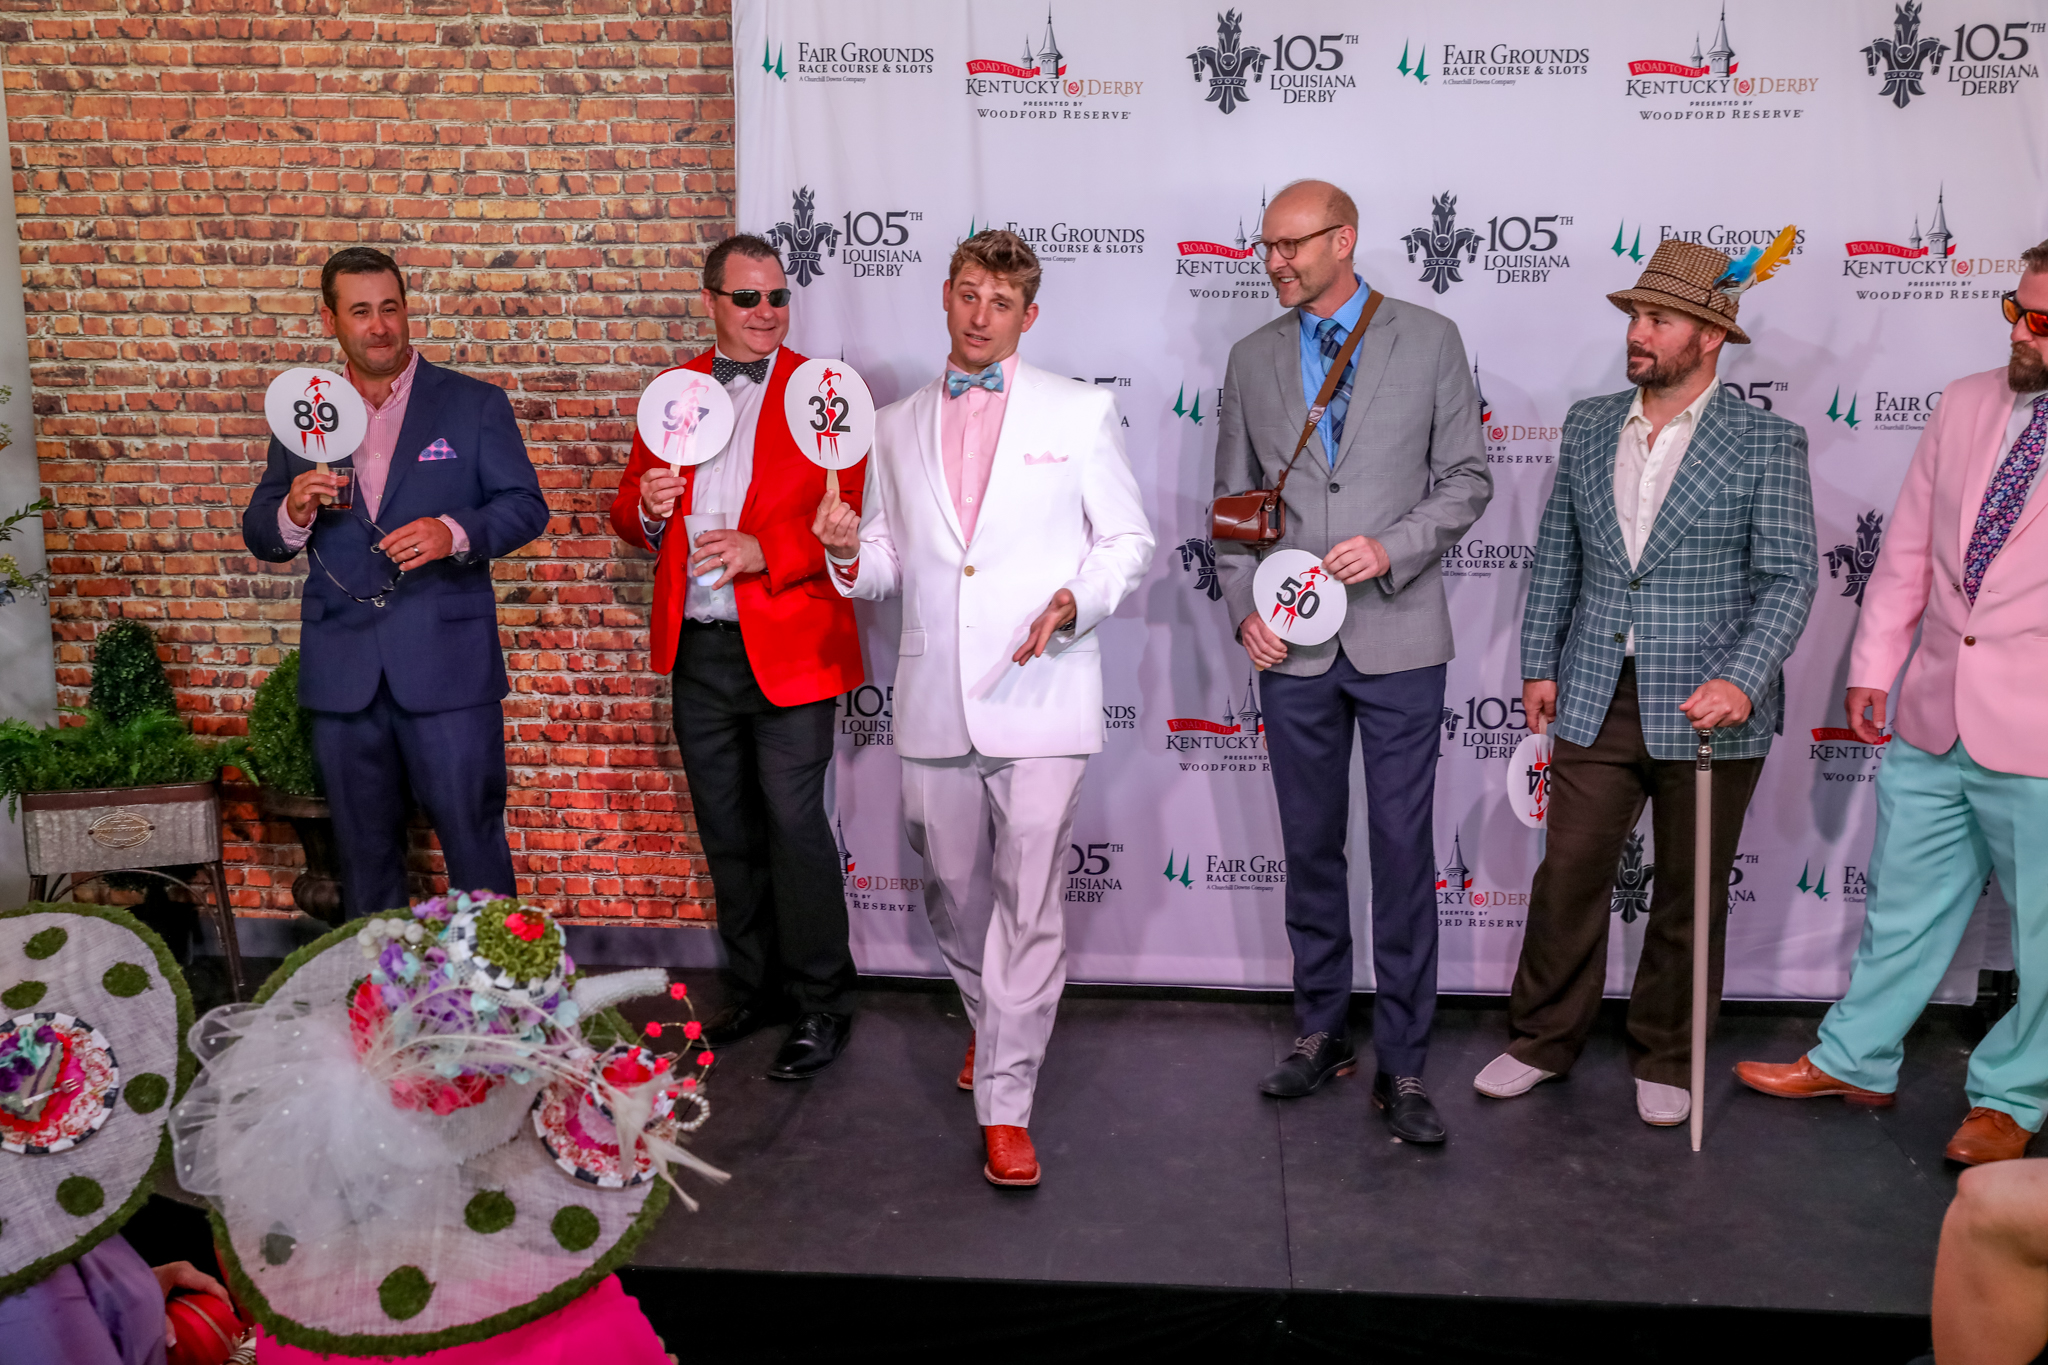 Fashion at the Races Louisiana Derby 2018 (38)